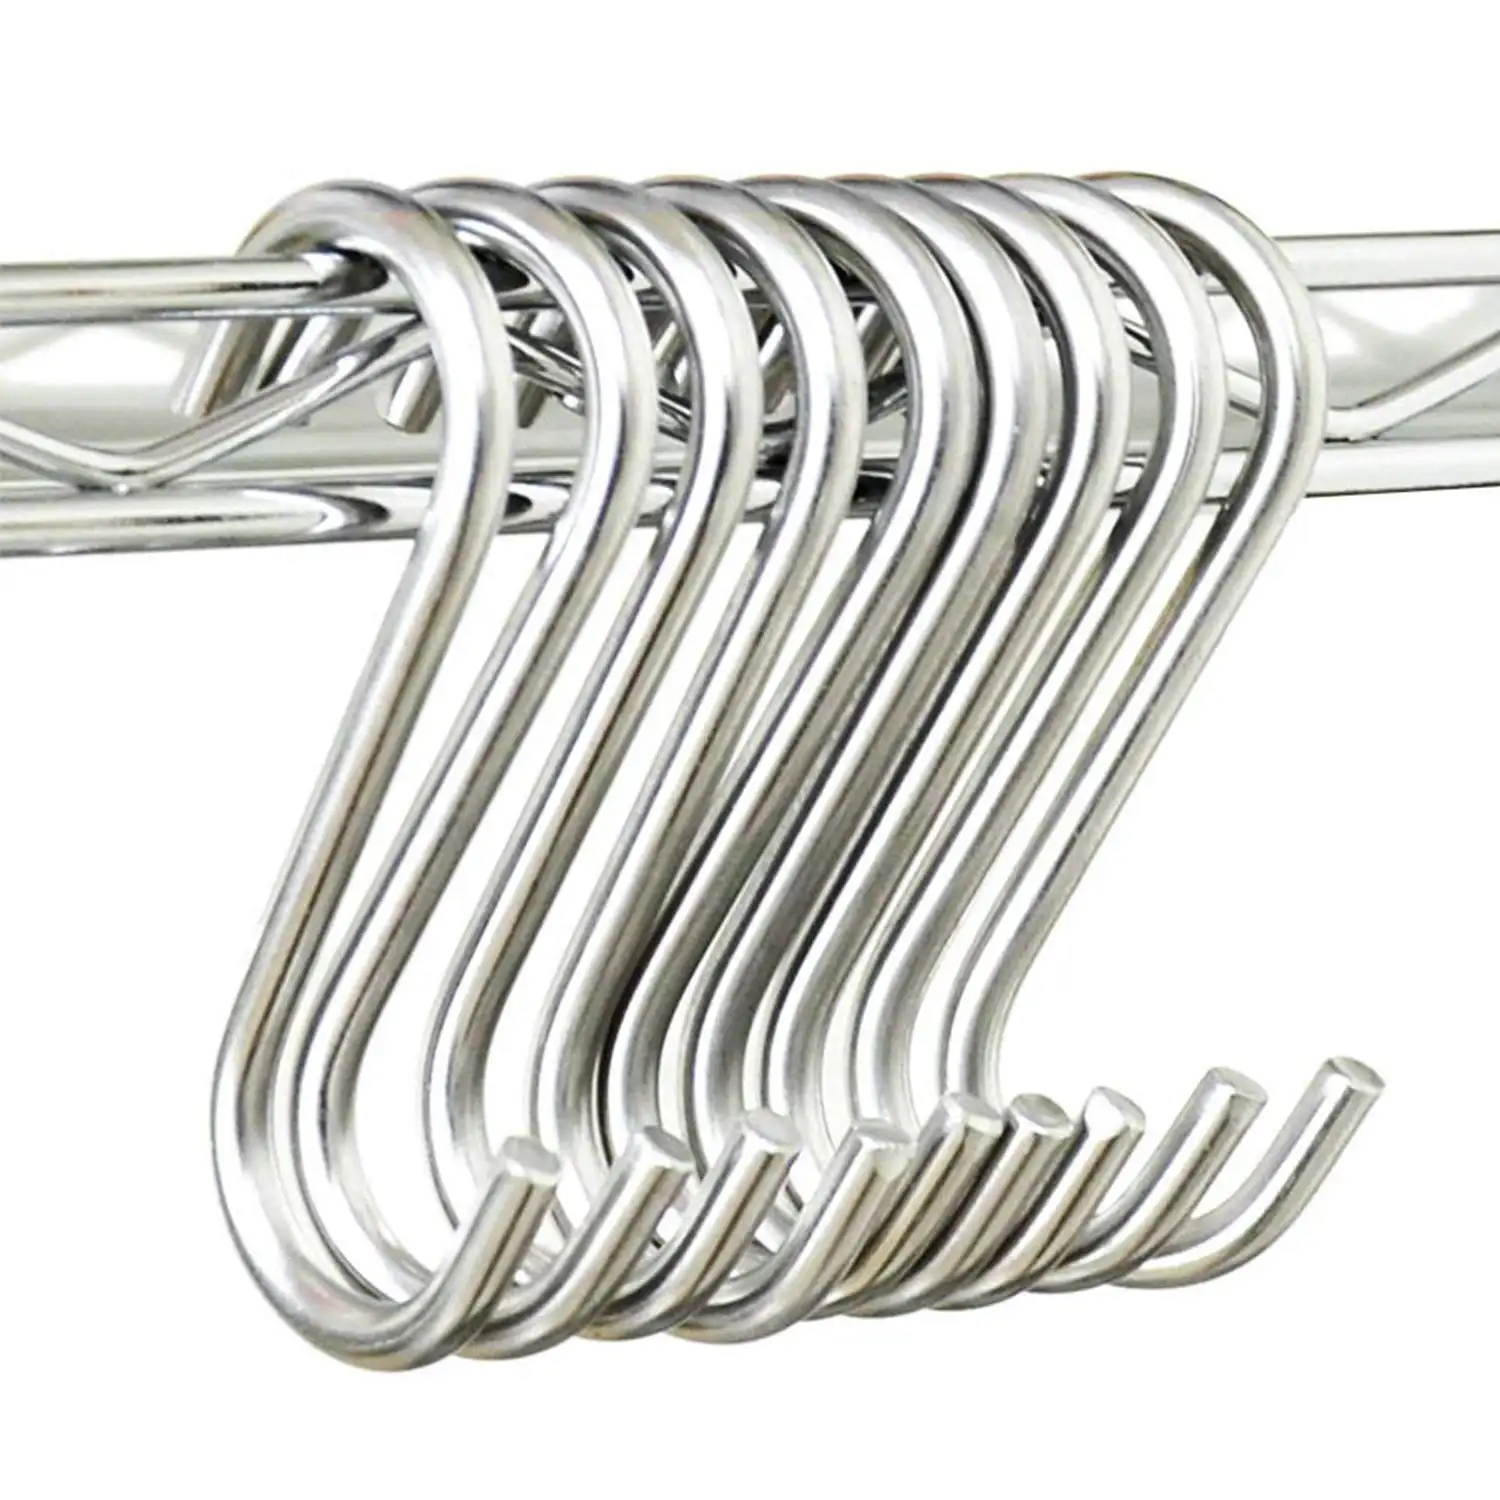 Silver 3.5 Inch Stainless Steel S Hanging Hooks for Indoors Outdoors Hang Anything